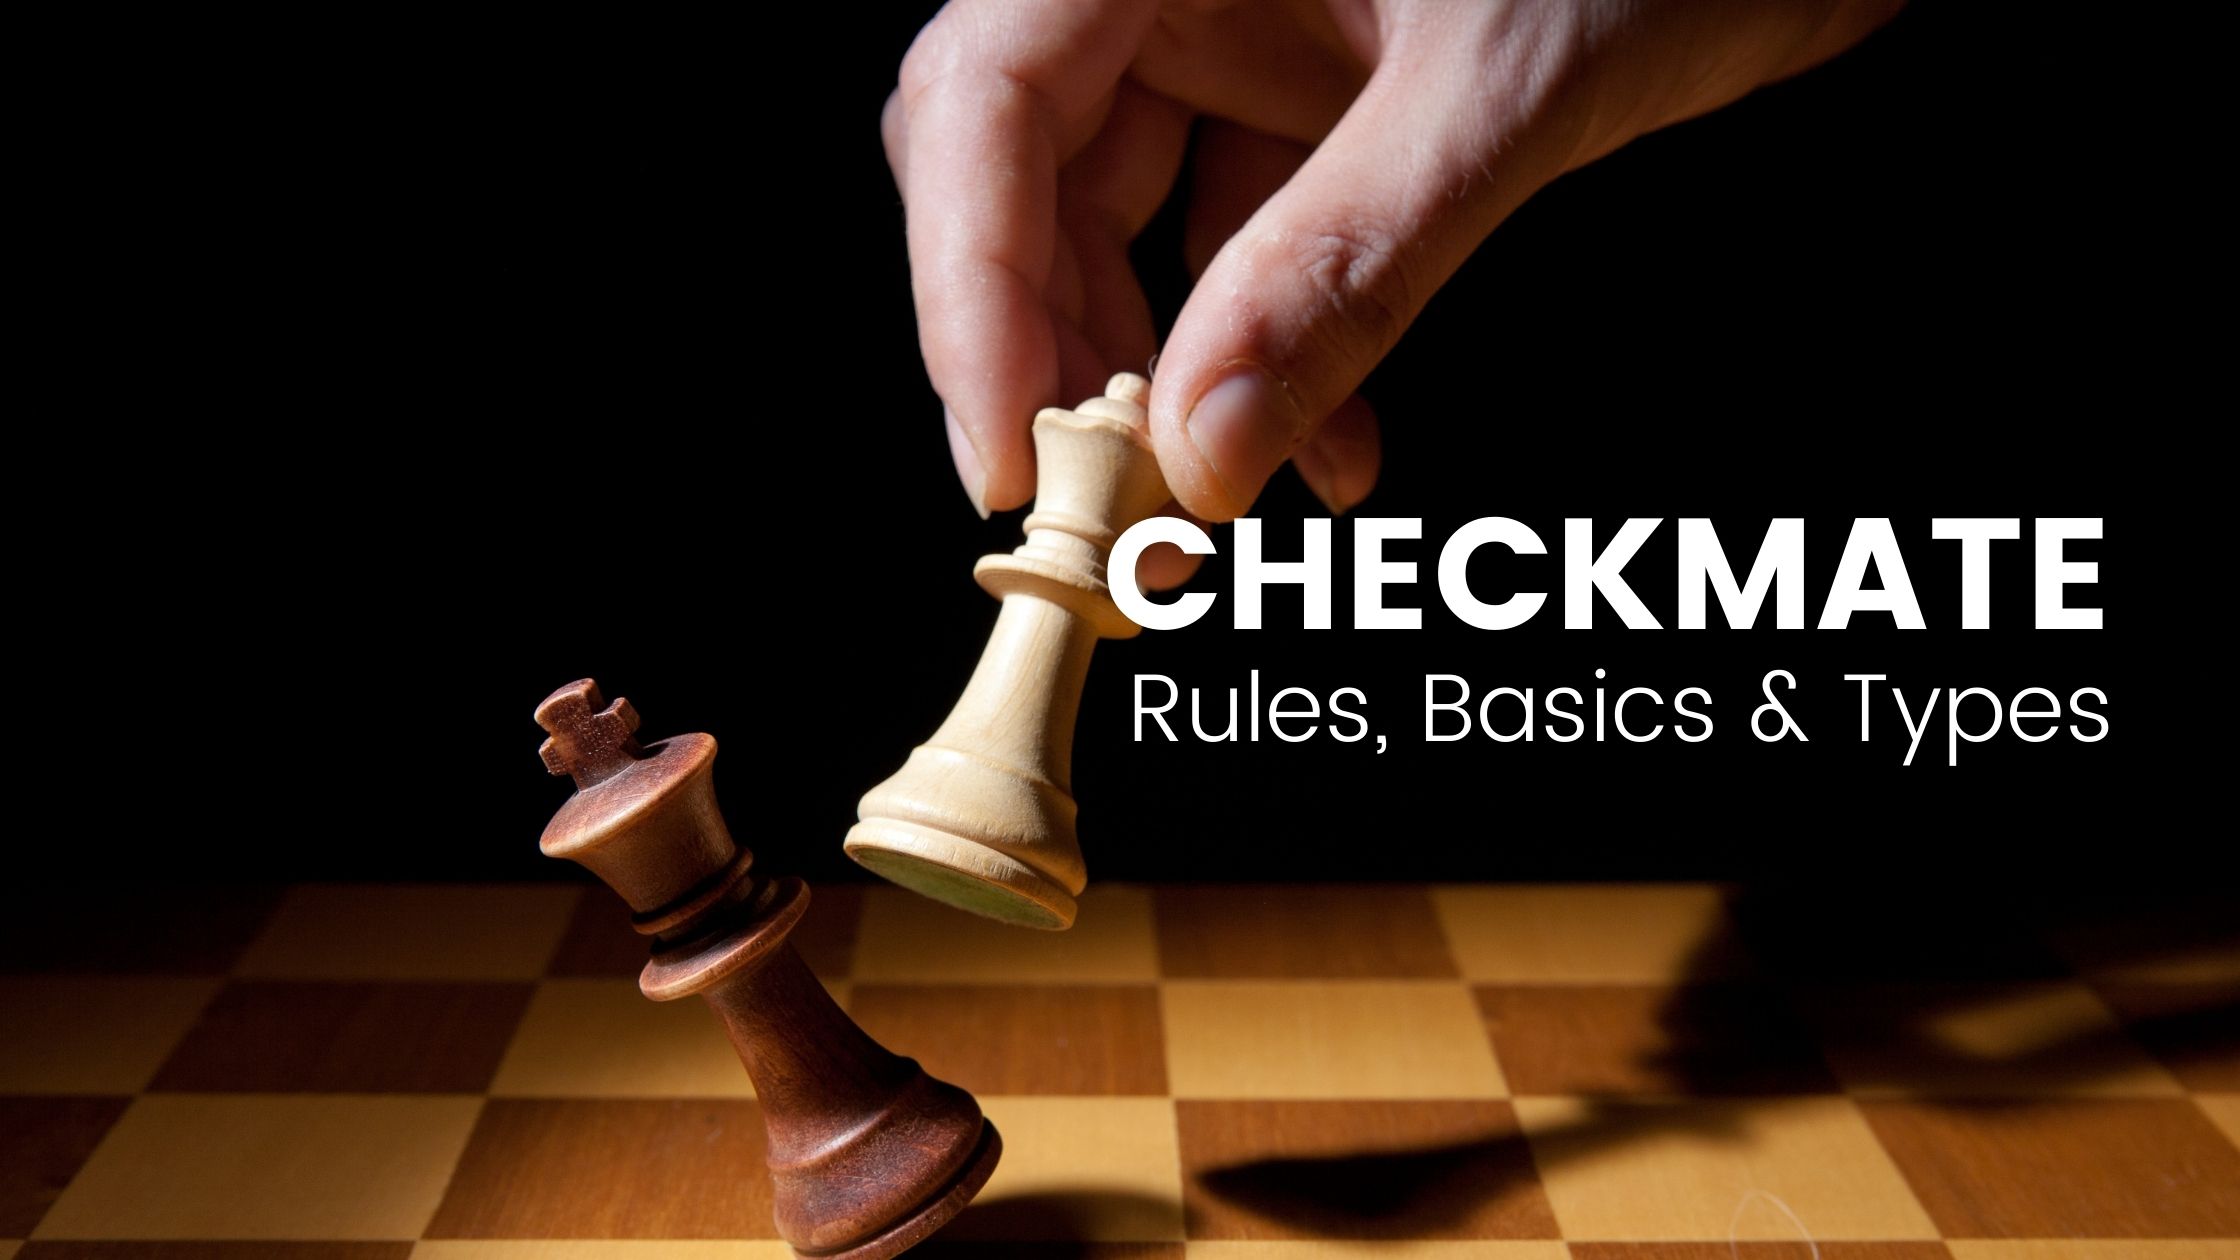 ♝ The Caro-Kann Defense Smothered Mate is one of the fastest checkmates in  chess. ♝ Learn all of the 10 Fastest Checkmates‎ ⬇️, By Chess.com